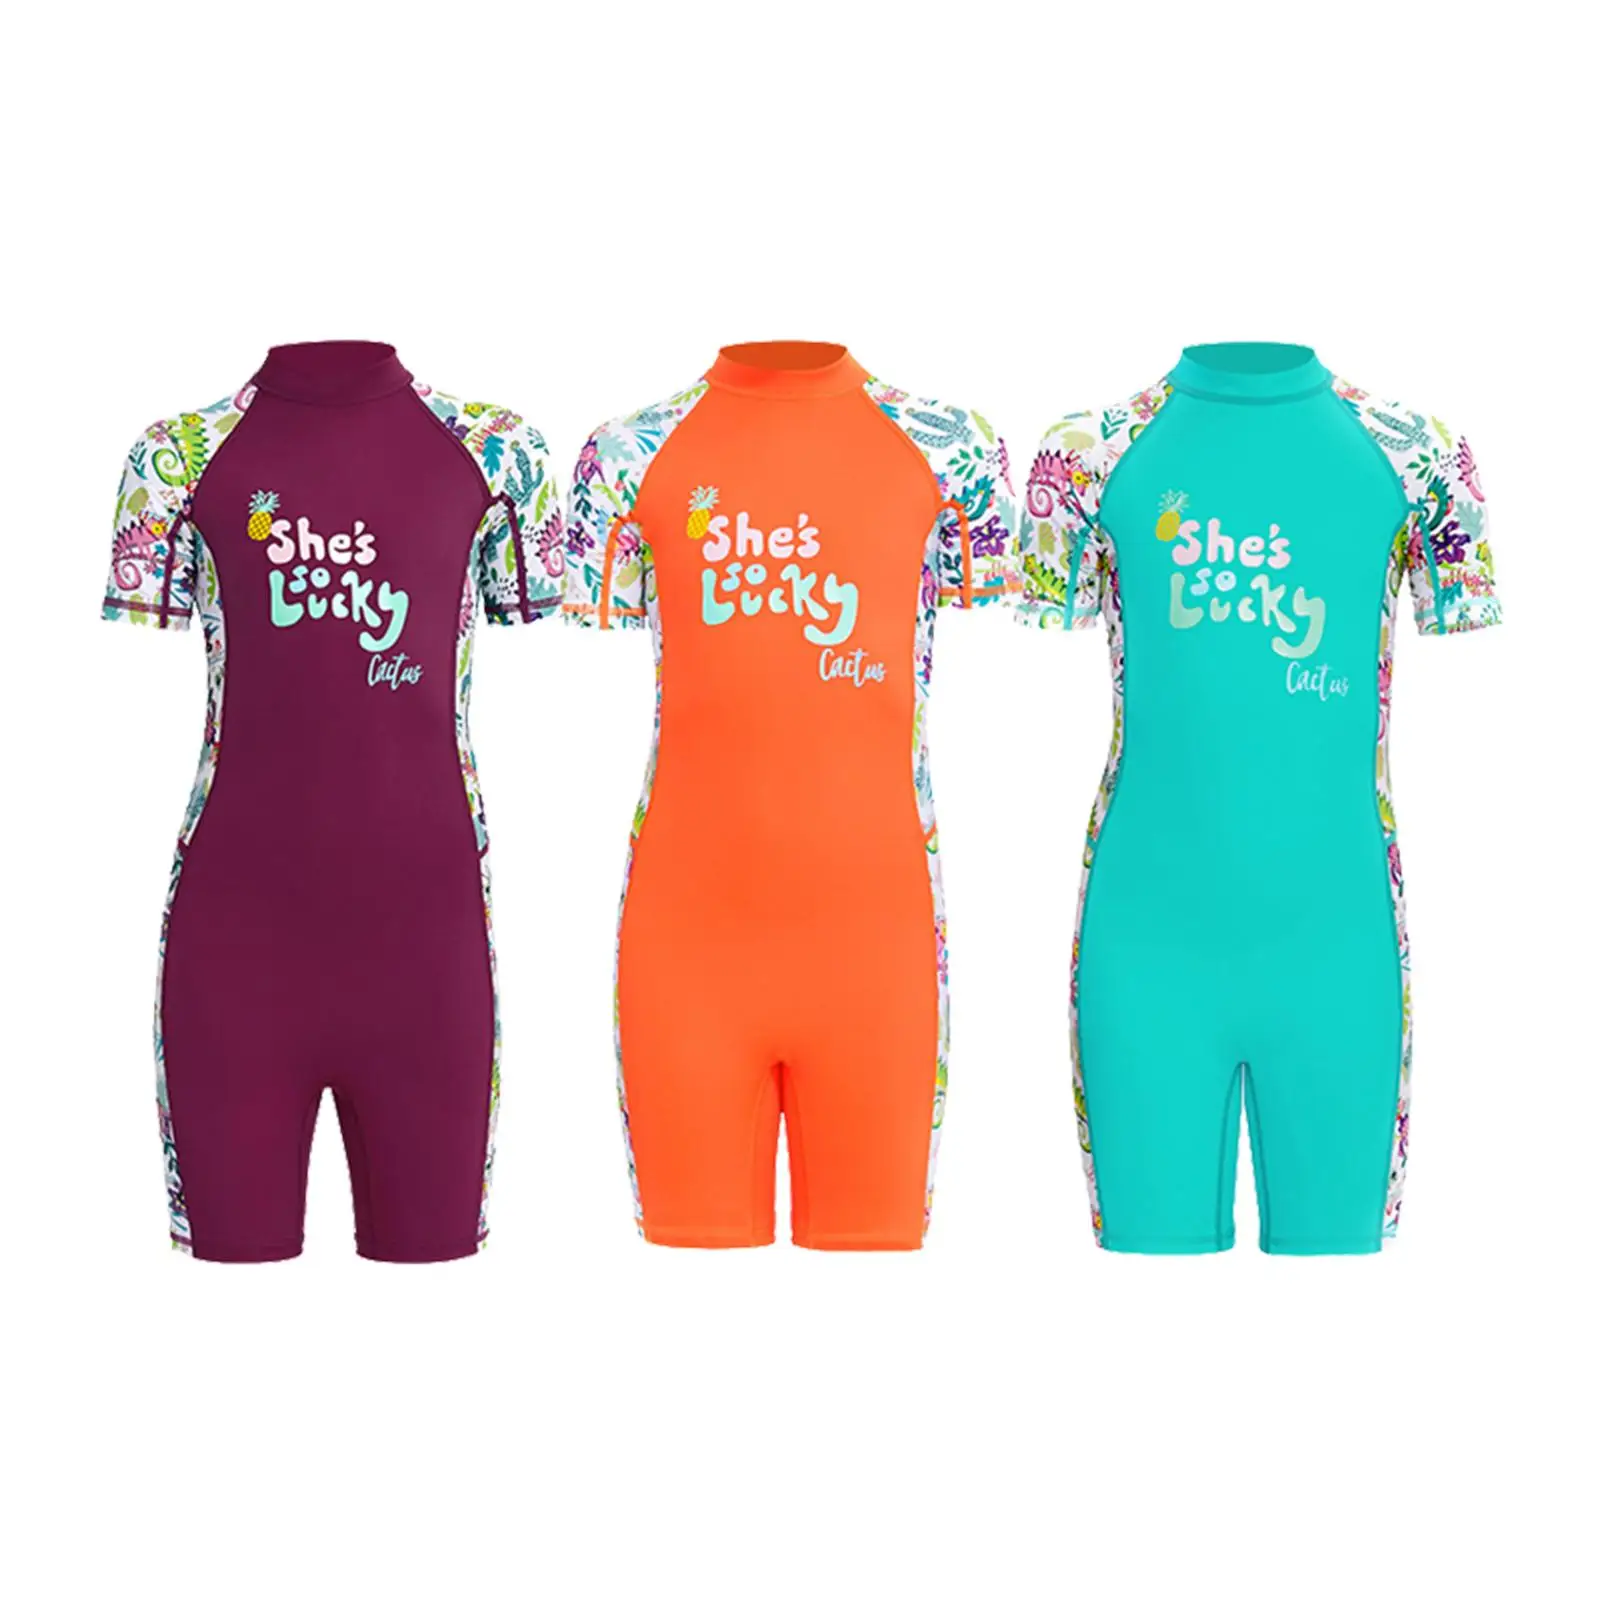 Kids Shorty suit  Swimsuits + Sun  Neoprene Kids suit for Diving Surfing Swimming